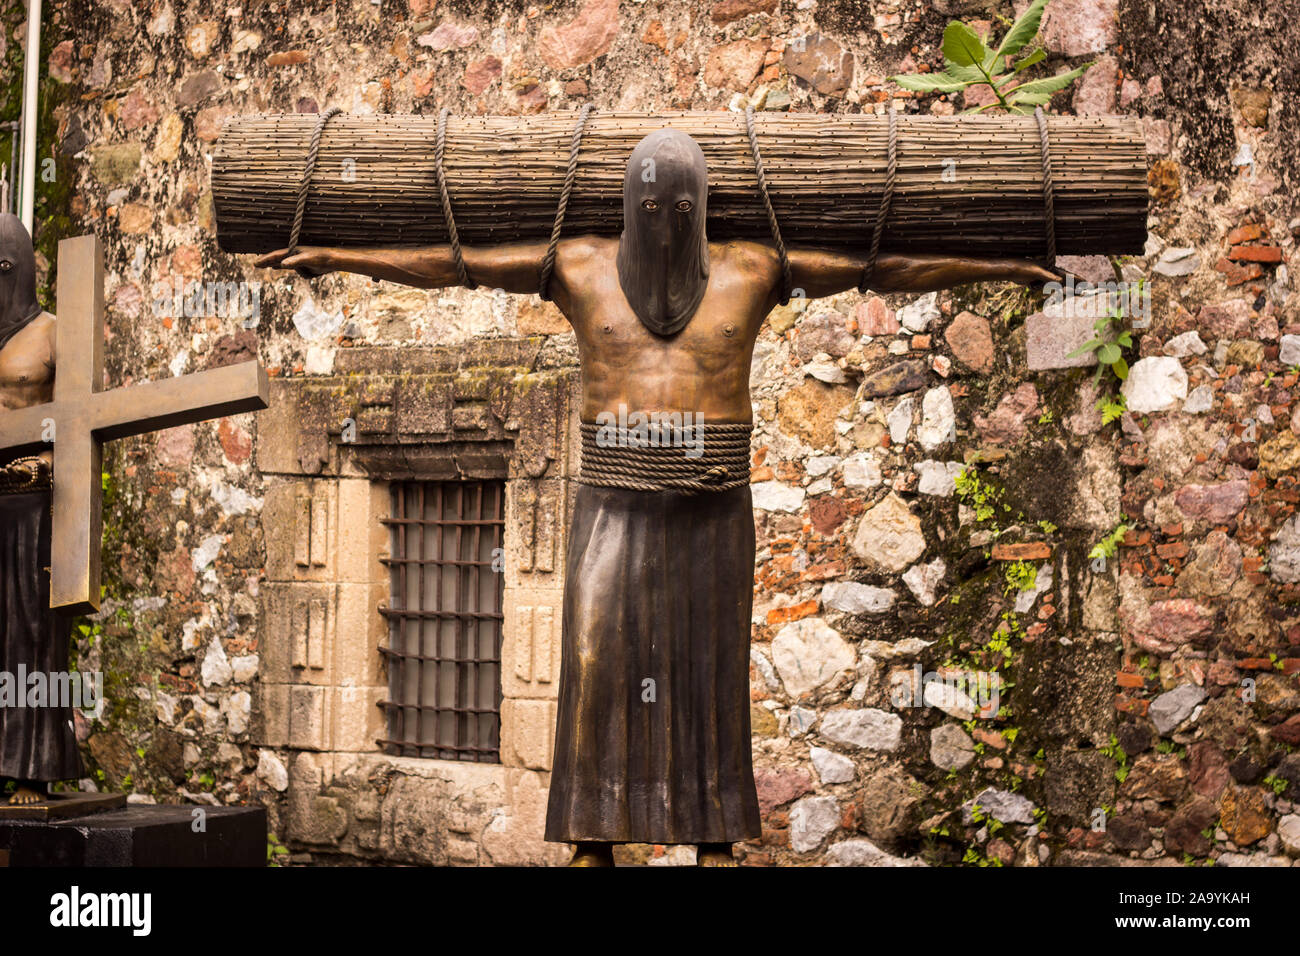 Hooded Medieval Executioner statue in Taxco Guerrero Mexico. Stock Photo